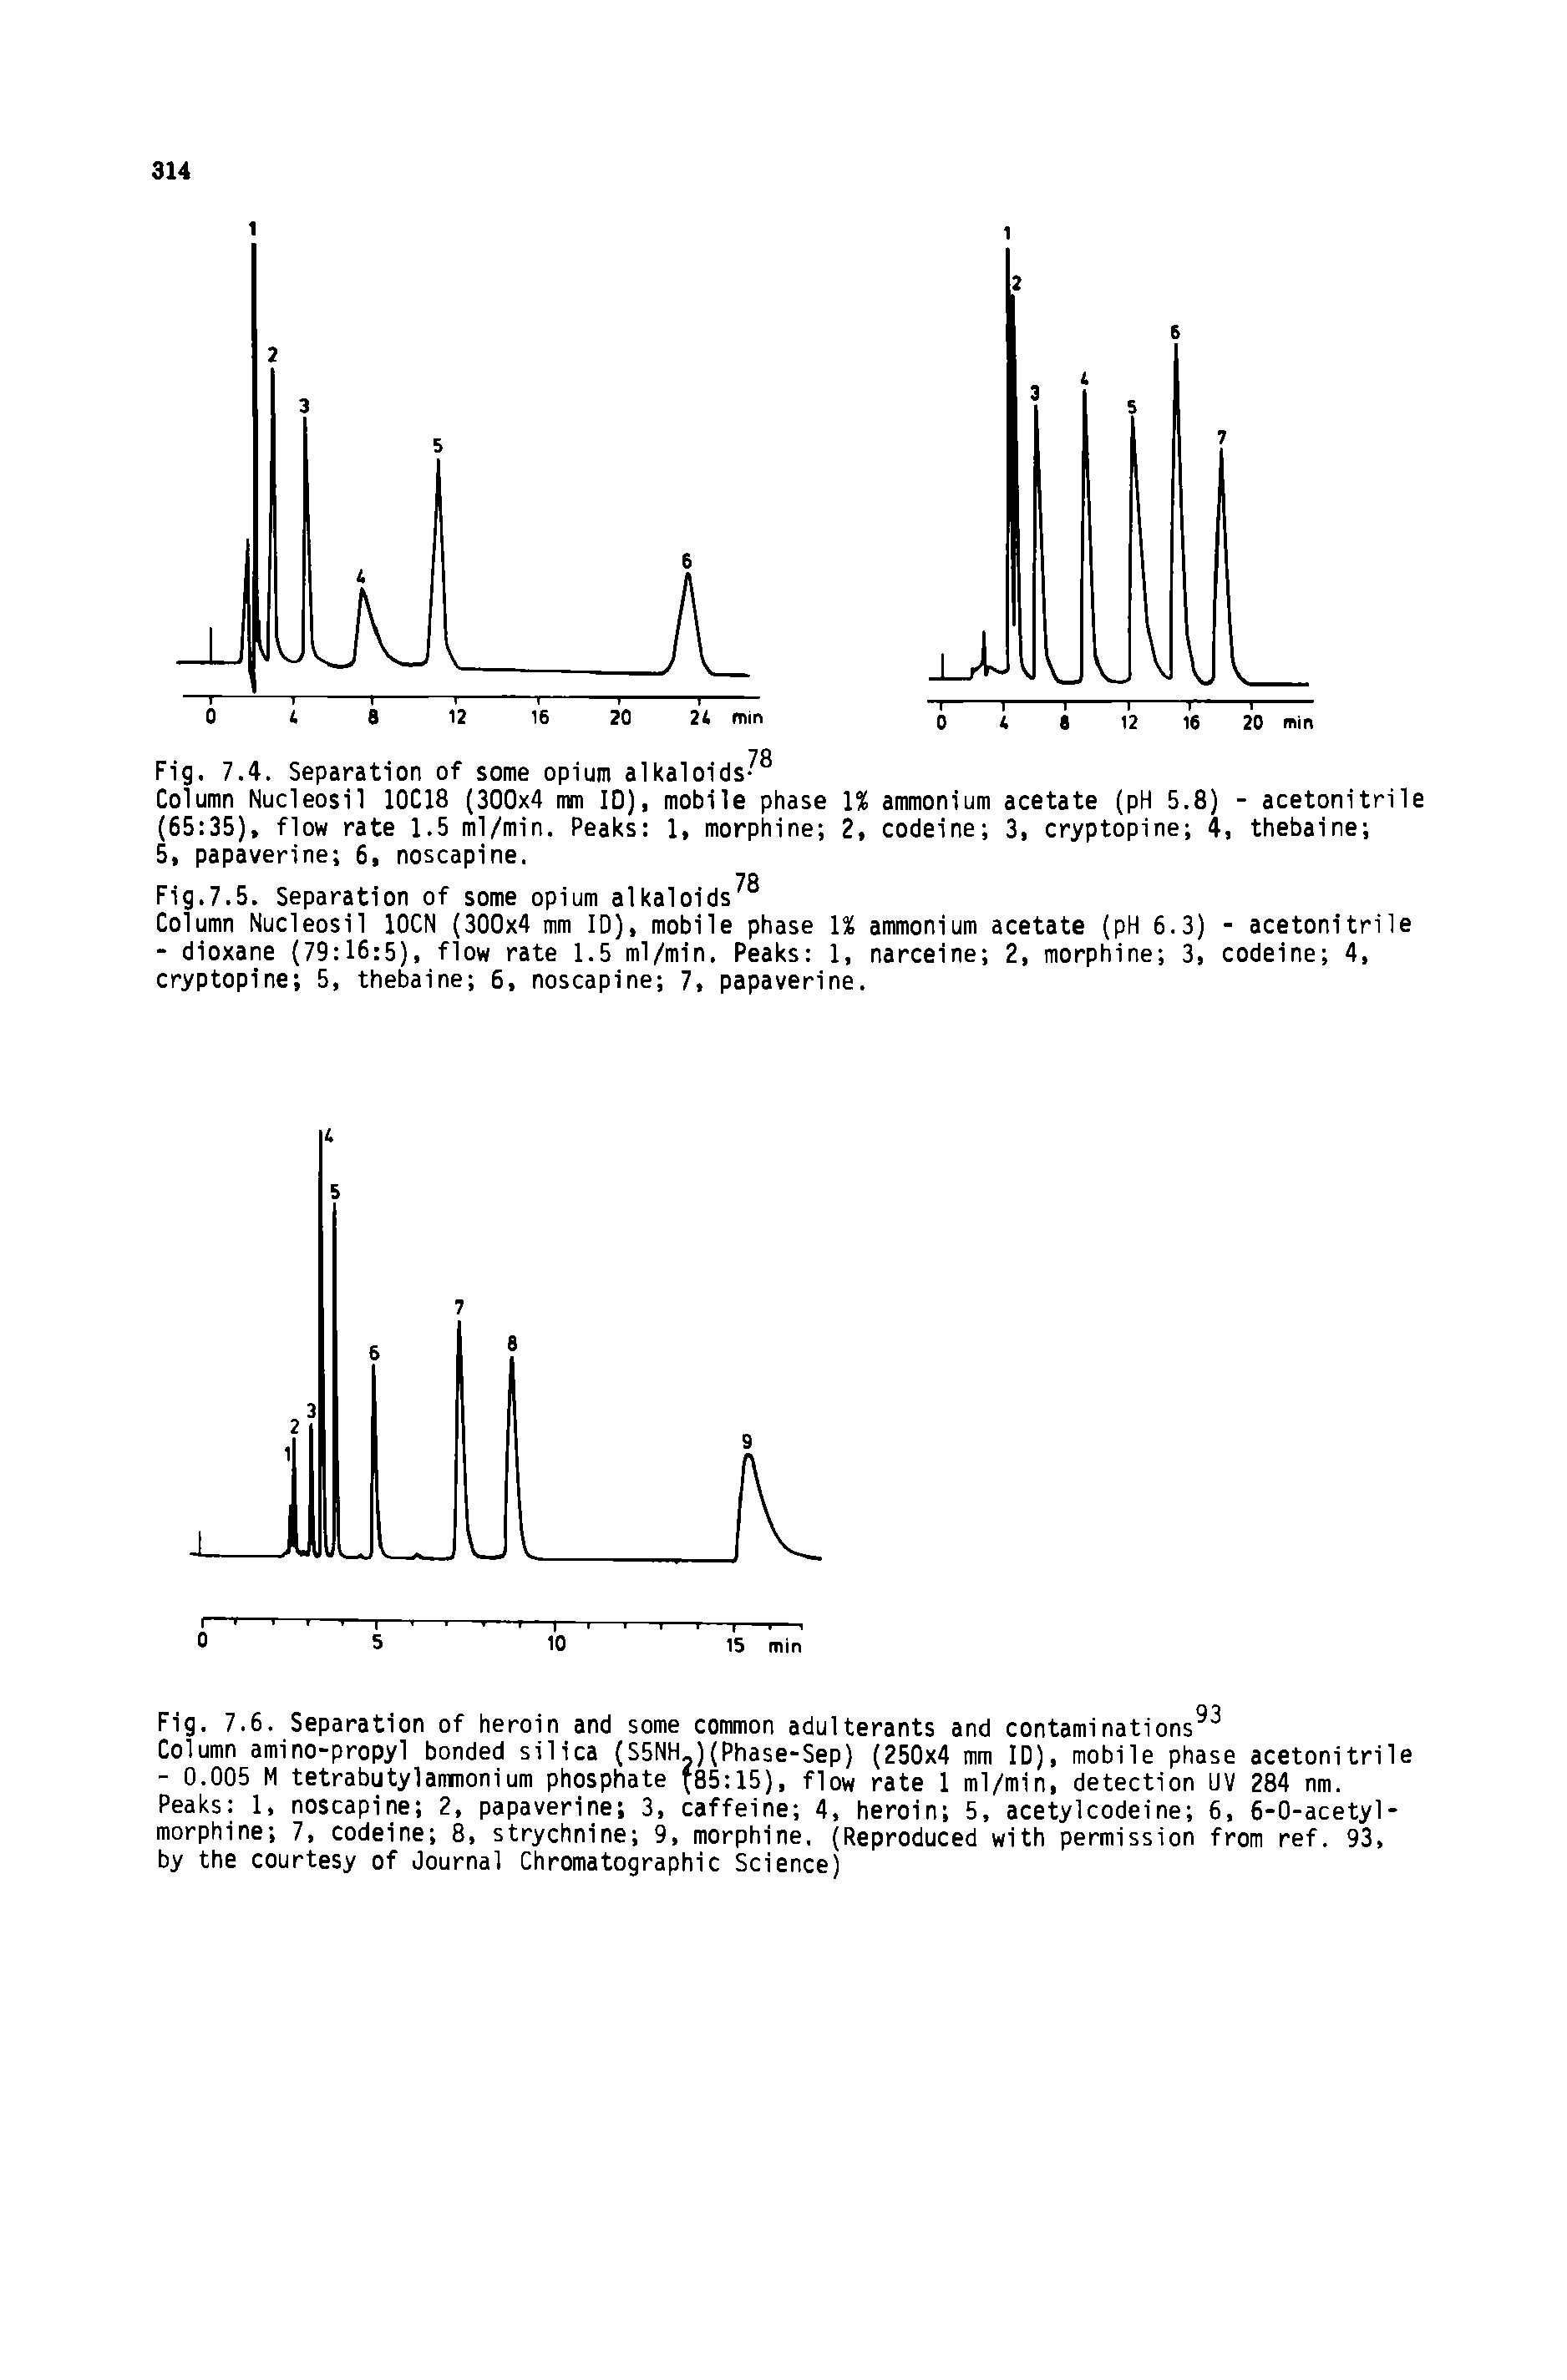 Fig.7.5. Separation of some opium alkaloids Column Nucleosil 10CN (300x4 mm 10), mobile phase - dioxane (79 16 5), flow rate 1.5 ml/min. Peaks cryptopine 5, thebaine 6, noscapine 7, papaverii...